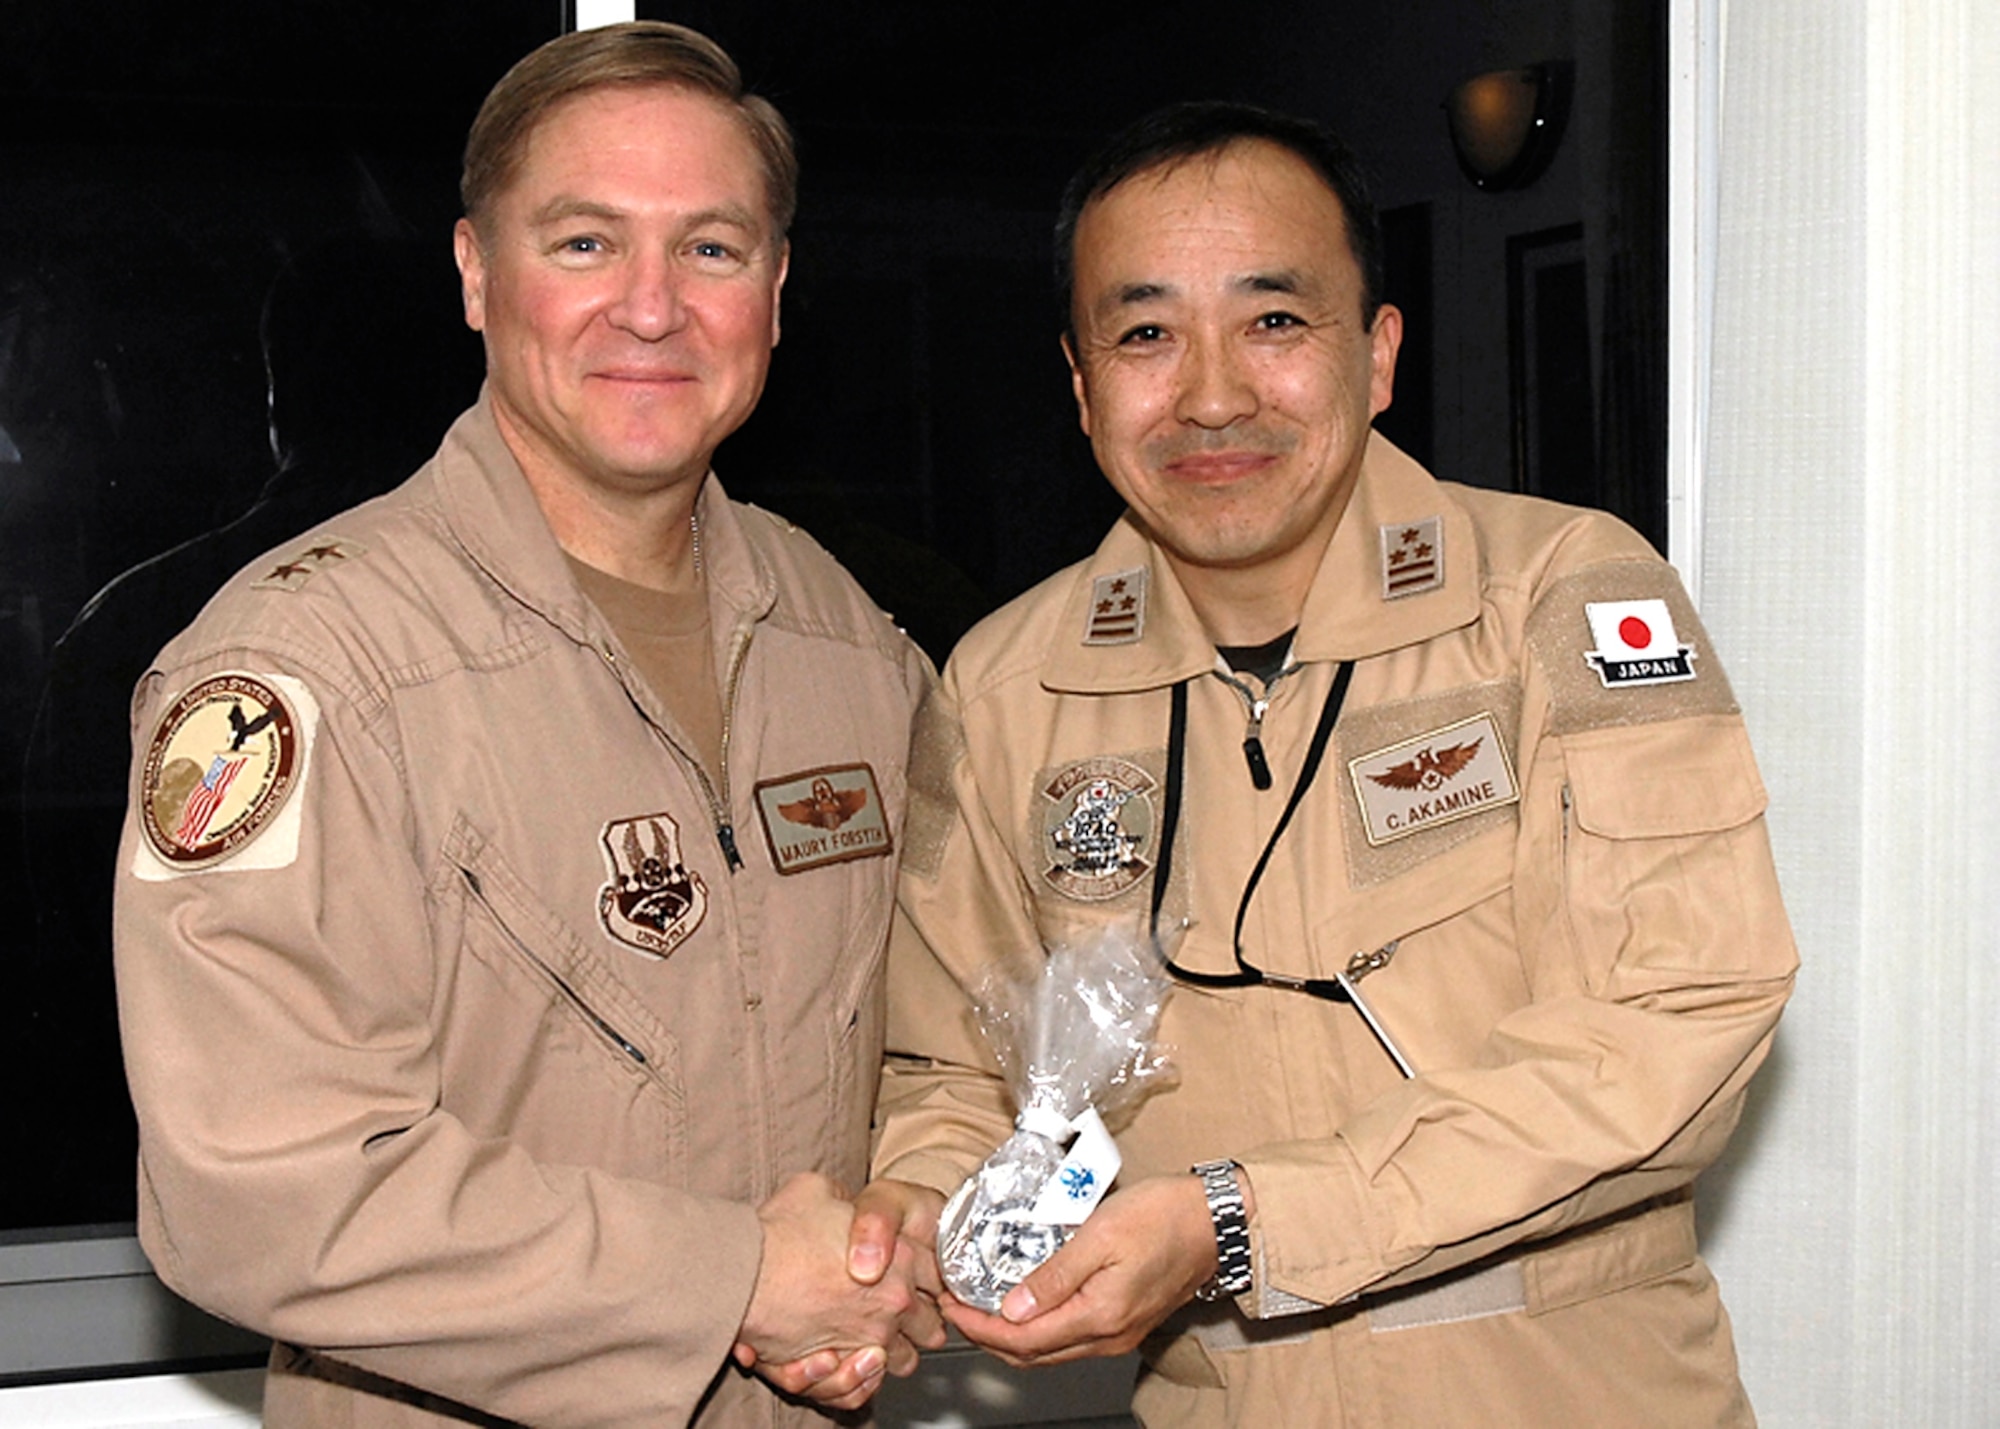 Maj. Gen. Maury Forsyth, Combined Air and Space Operations Center (CAOC), Deputy Commander, presents a gift on behalf of Lt. Gen. Gary North, CAOC, Commander, to Col. Chiyohiro Akamine, Commander, Iraq Reconstruction Support Airlift Wing, Japanese Self Air Defense, during his visit to the CAOC on February 9, 2008. (RELEASED) (U.S. Air Force Photo By: Staff Sgt. Christina M. Styer)